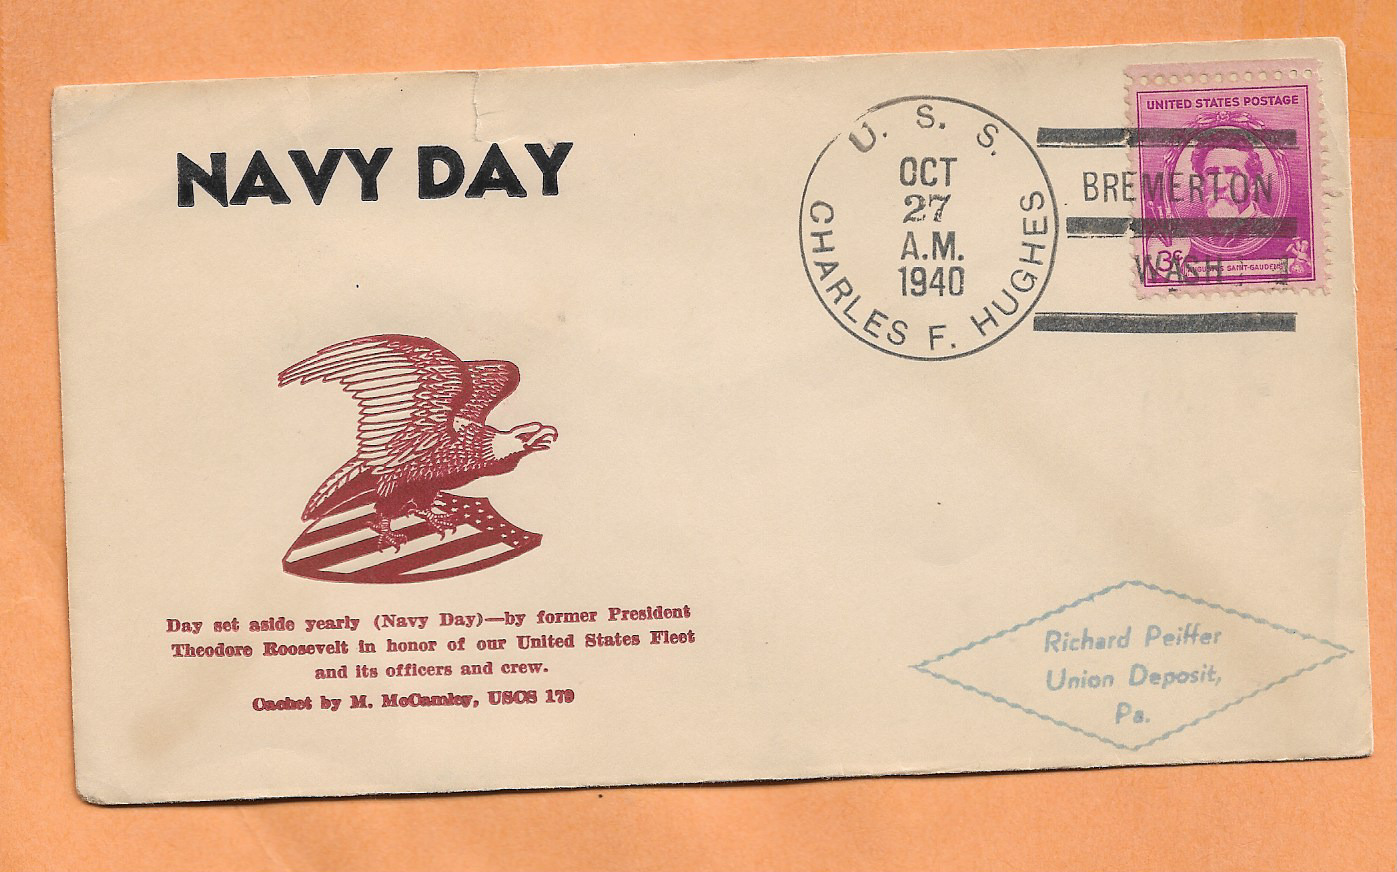 U.S.S.  CHARLES F. HUGHES NAVY DAY OCT 27,1940  NAVAL COVER